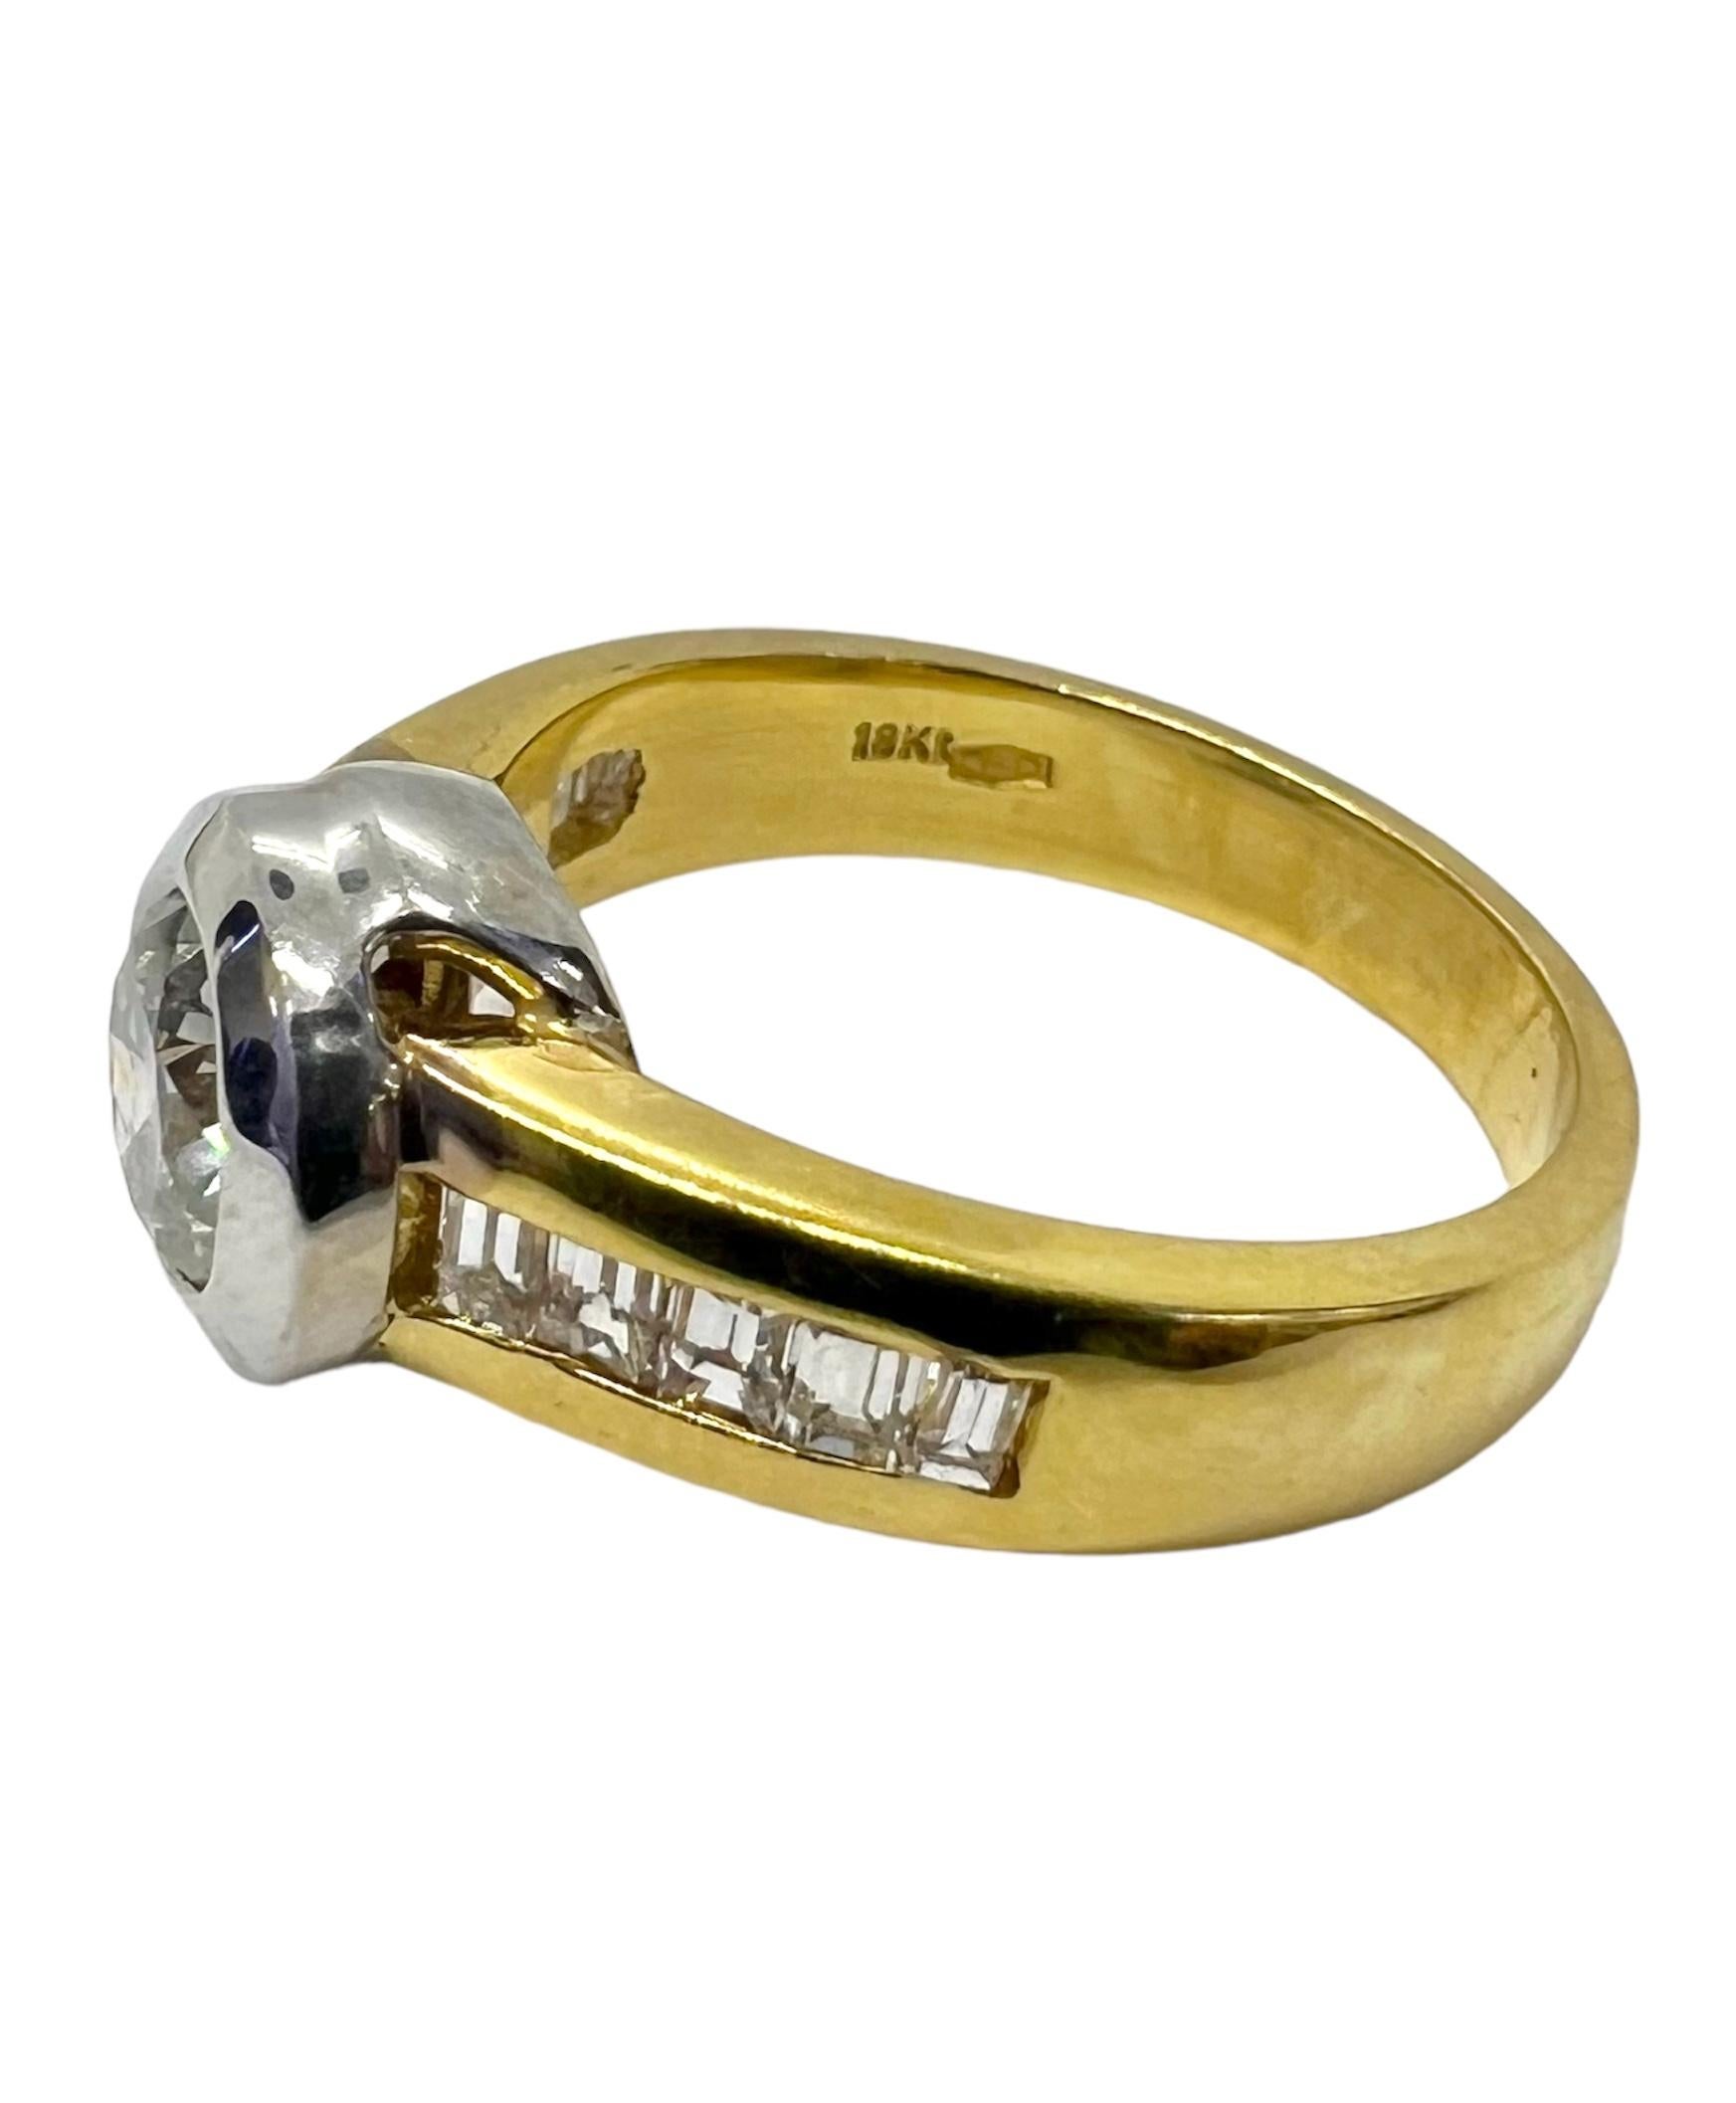 18K yellow gold ring with round center stone accentuated with emerald cut diamonds.

Sophia D by Joseph Dardashti LTD has been known worldwide for 35 years and are inspired by classic Art Deco design that merges with modern manufacturing techniques.